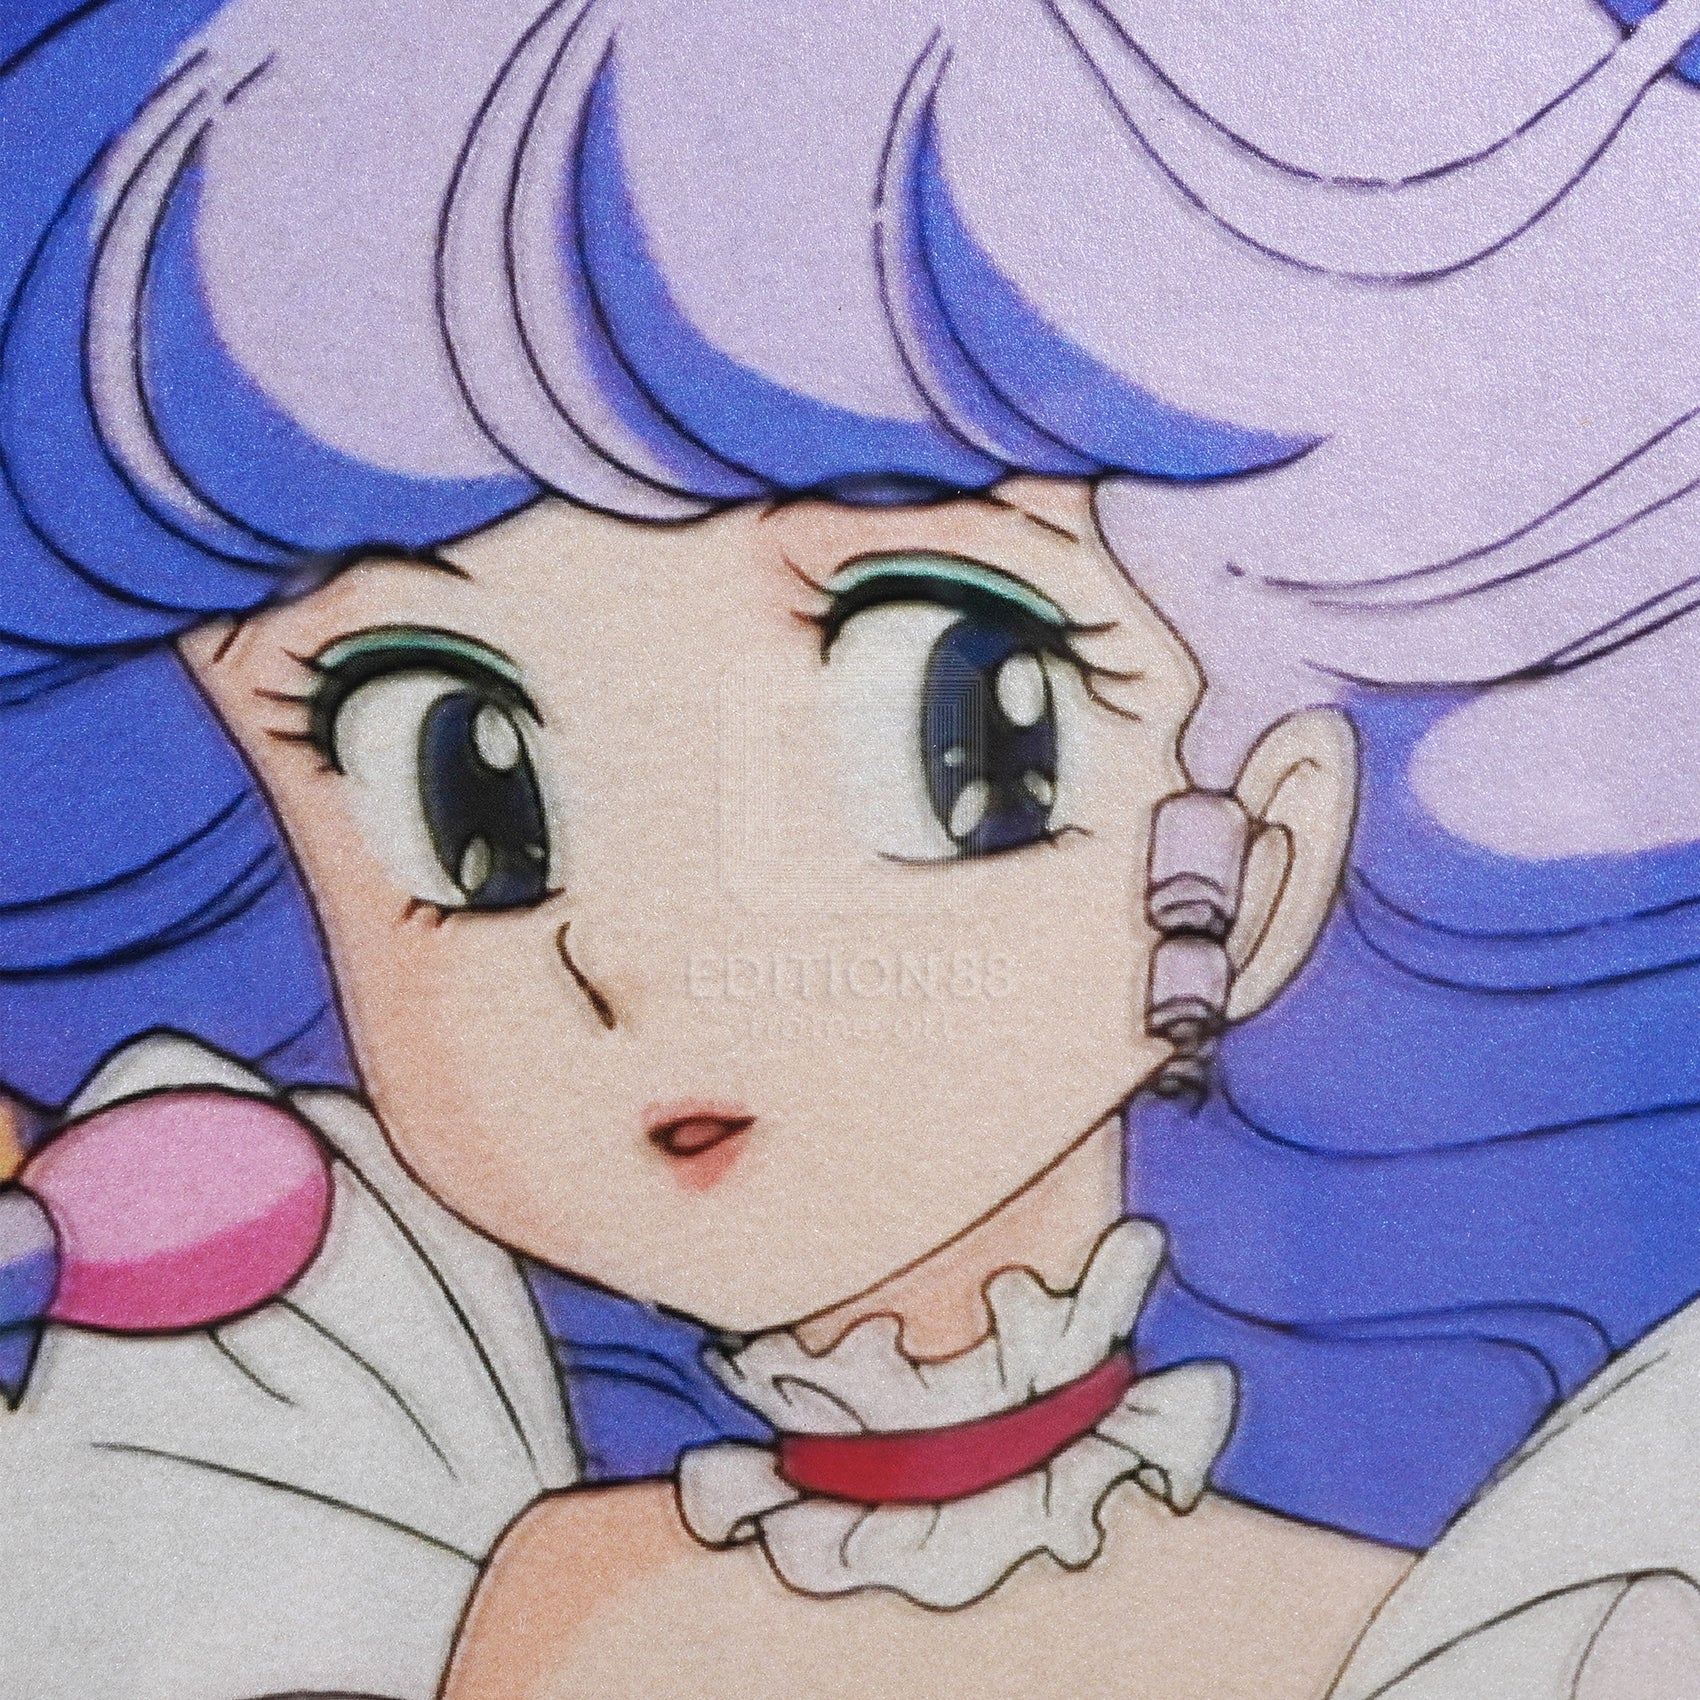 Magical Angel Creamy Mami, 88Filmgraph #1 ‘Father is a Middle-Aged Motorcyclist’